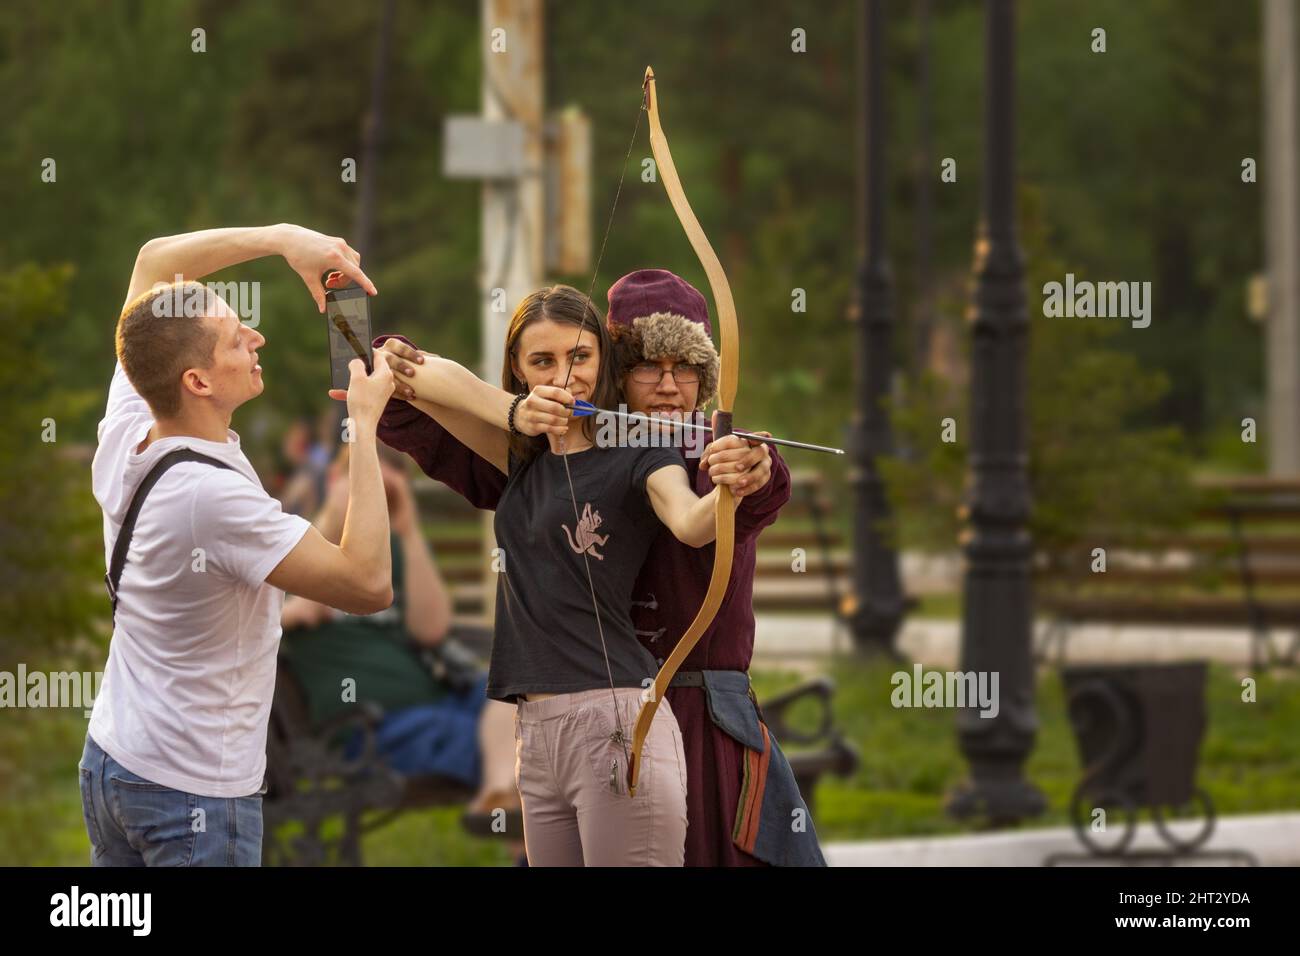 Omsk, Russia. 9 May, 2021. Preparing for a mass archery flash mob. The guy takes a picture on the phone of his girlfriend with an archery bow and a tr Stock Photo